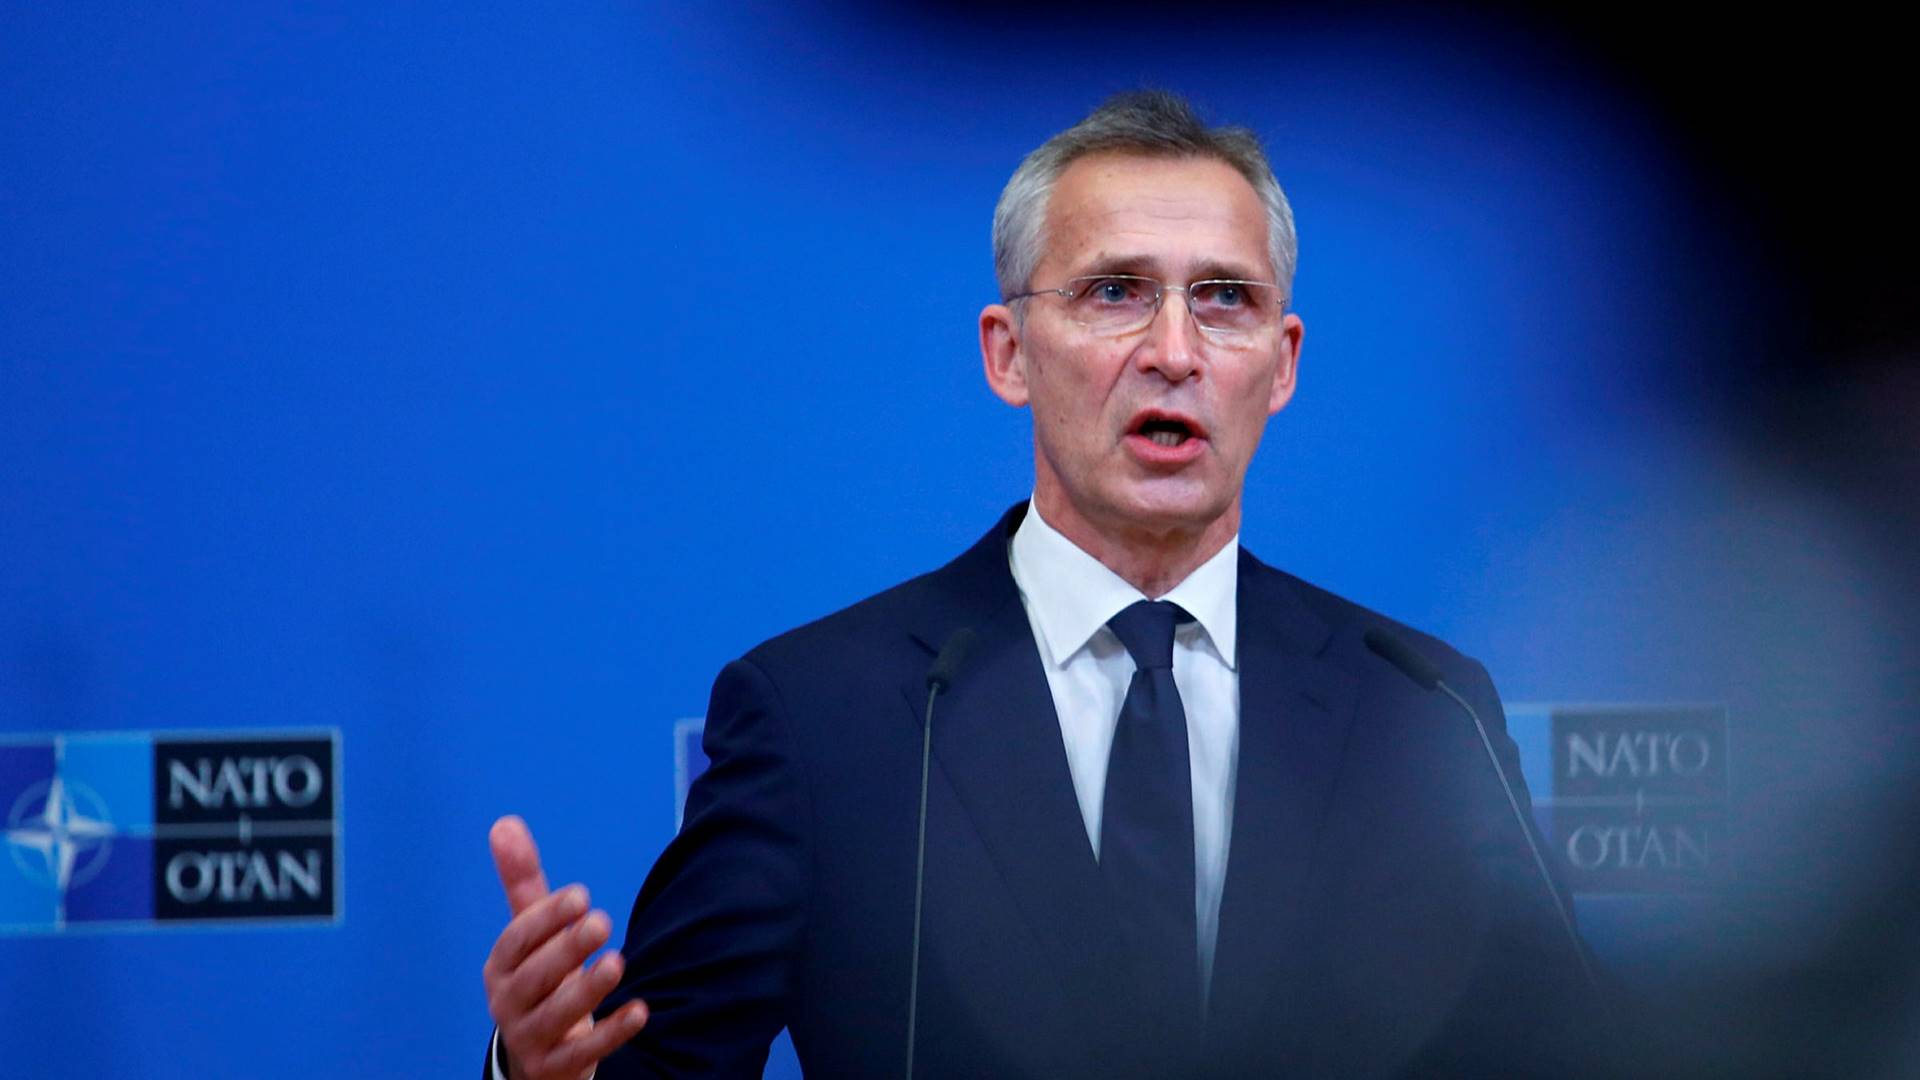 Russia is ‘a power in decline’ but still poses a military threat, NATO chief says